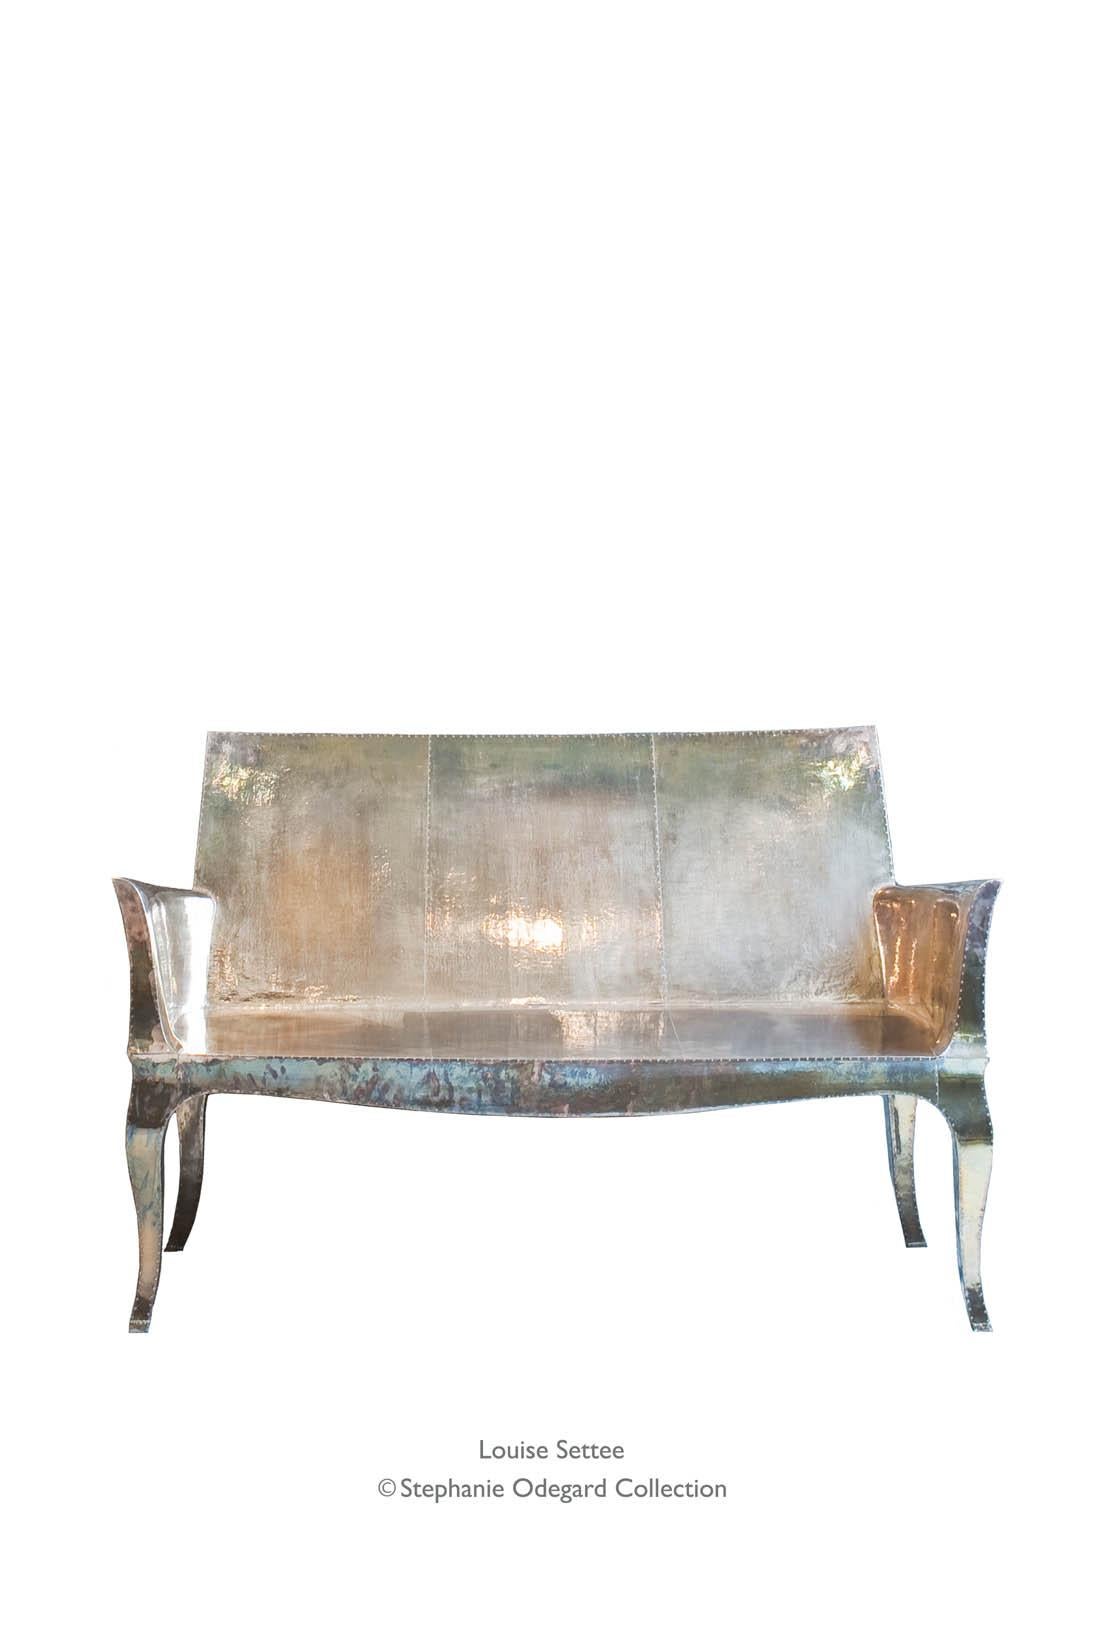 Louise Settee Art Deco Settees in Mid. Hammered Copper by Paul Mathieu For Sale 6